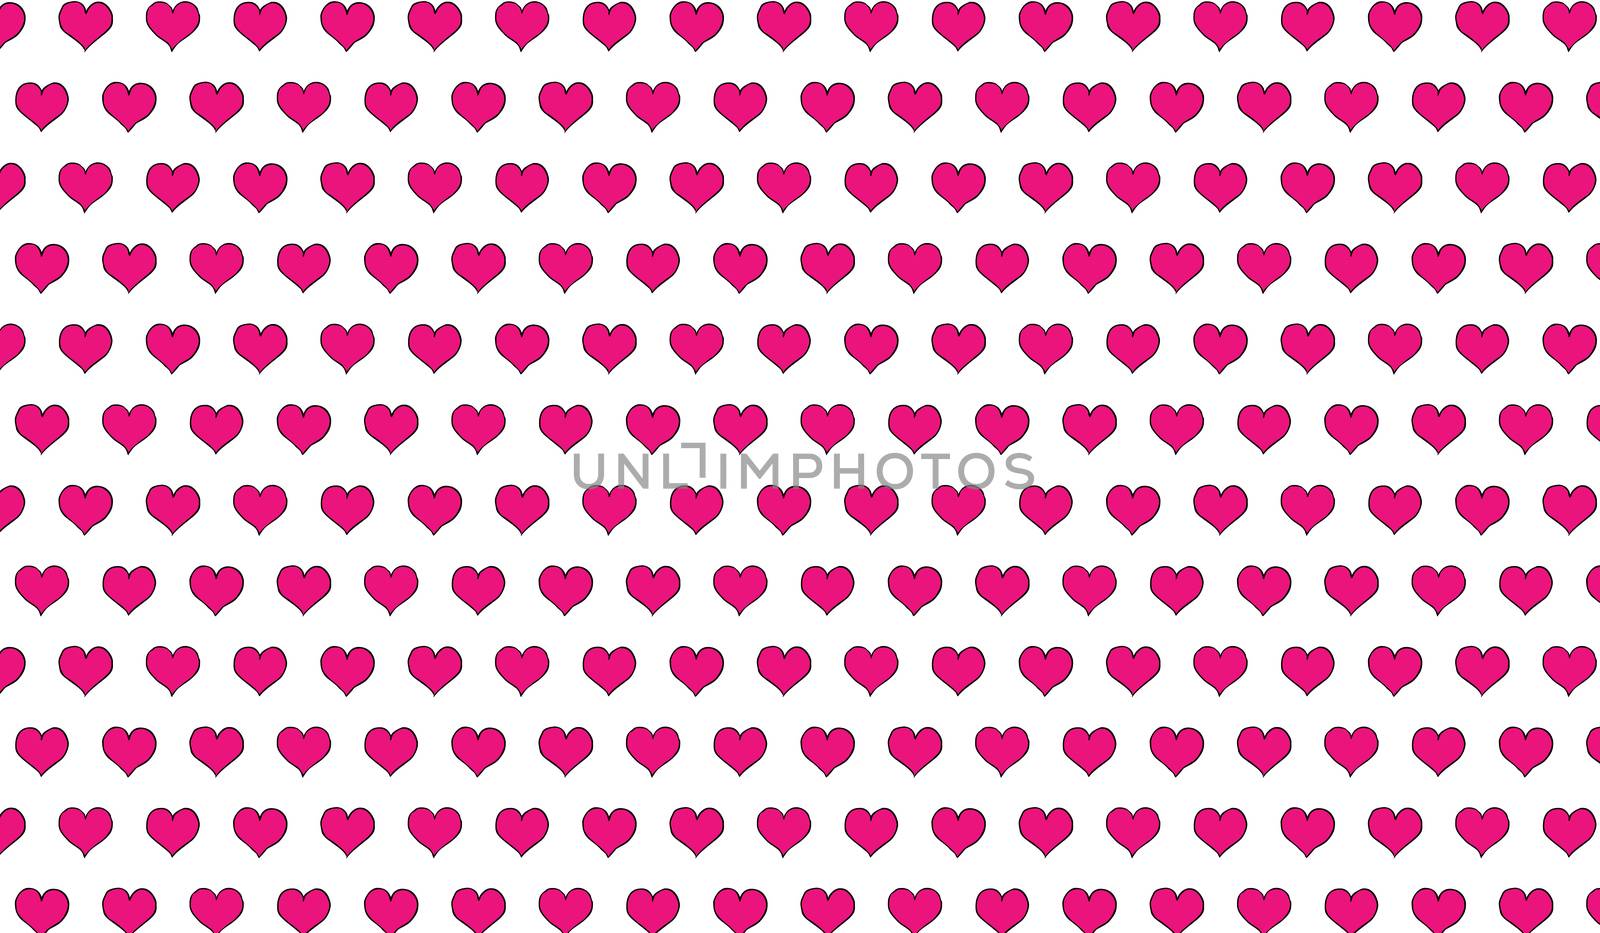 2d pink pattern of cartoon hearts on isolated background by Andreajk3